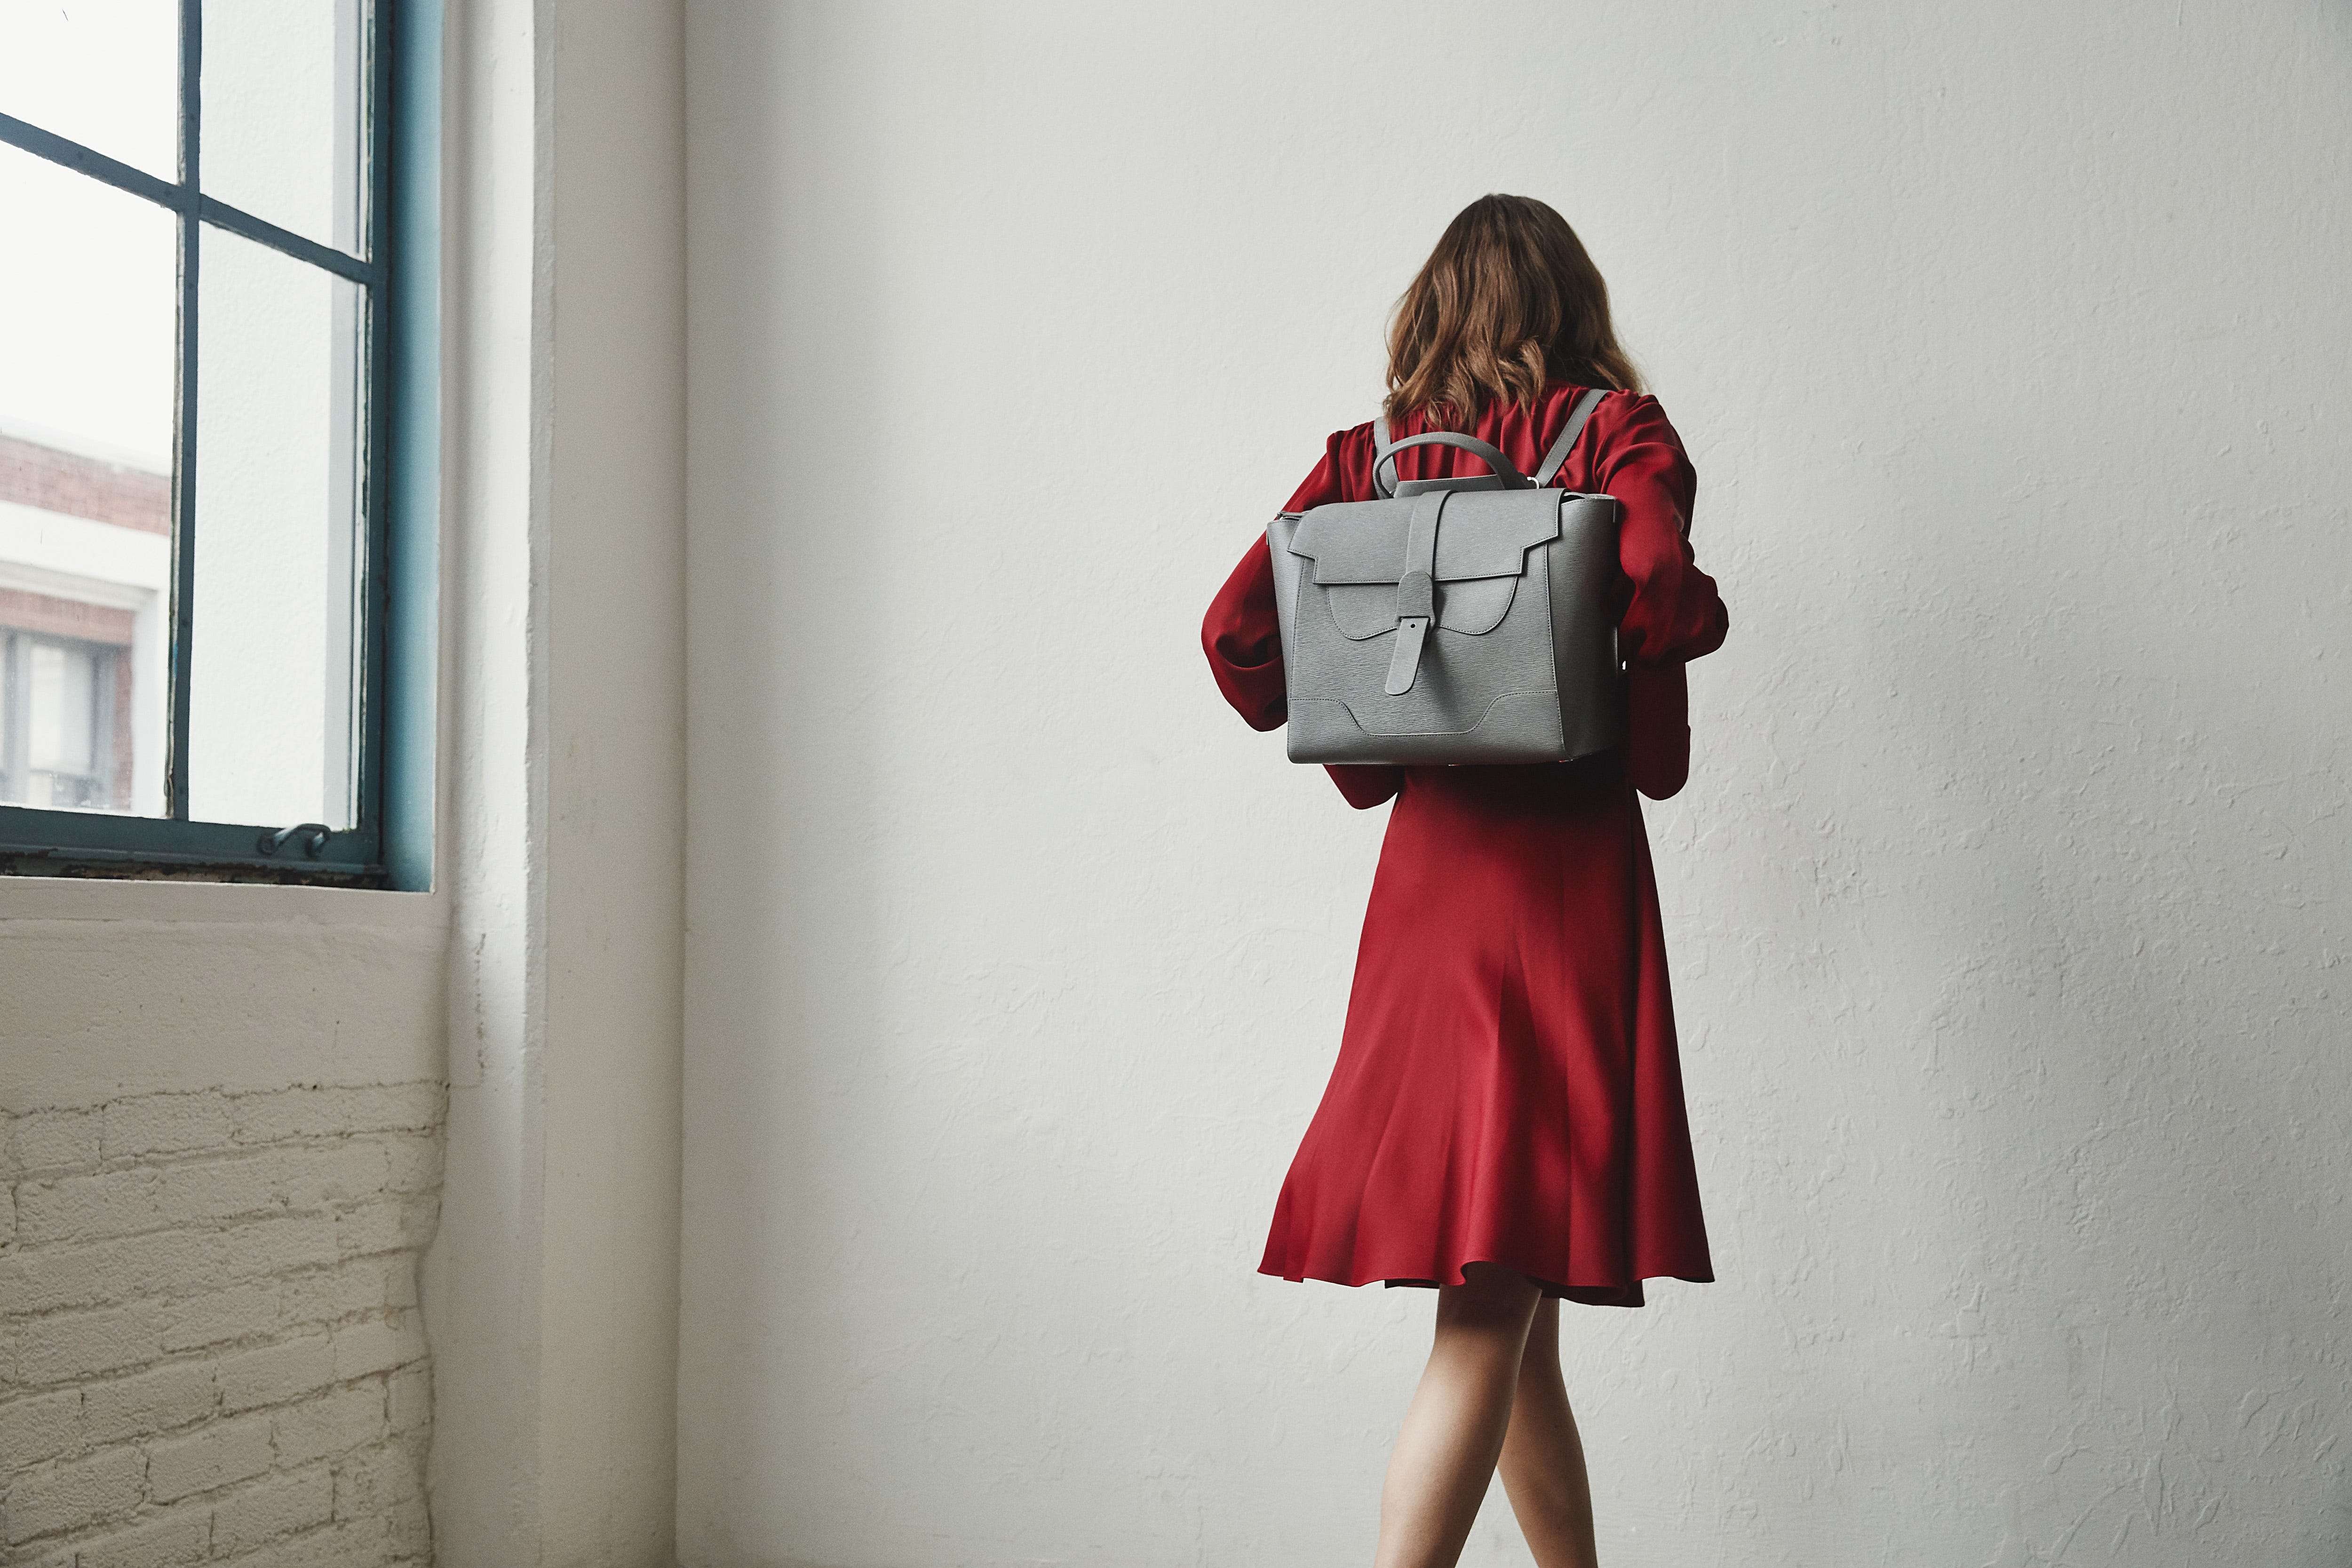 How Senreve's Revival handbags are more sustainable